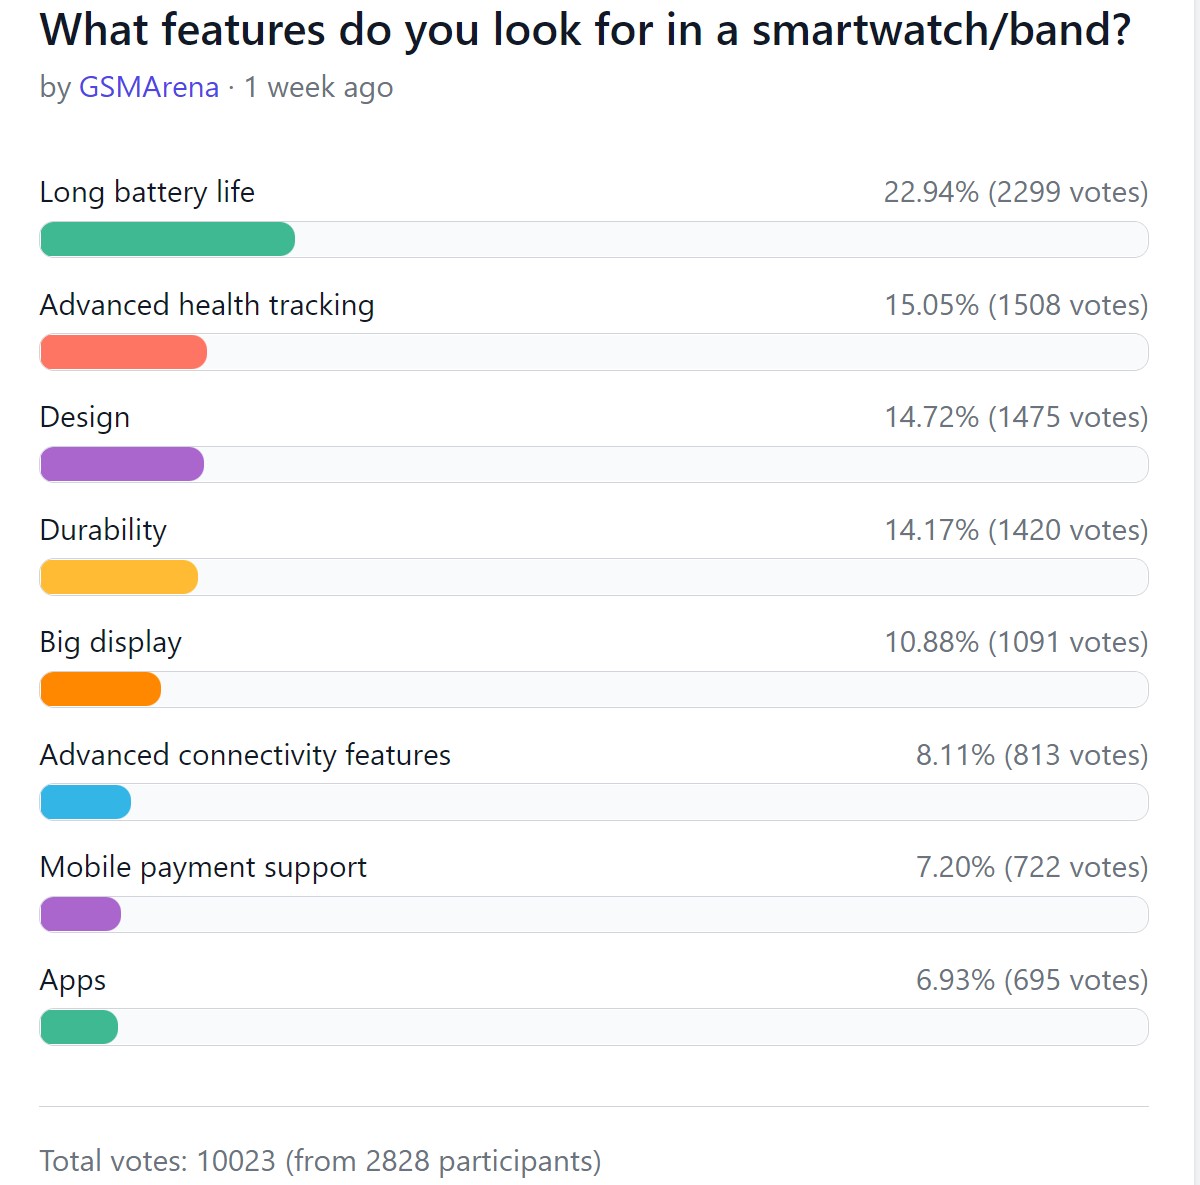 Weekly poll results: smartwatches are growing in popularity, especially the advanced ones